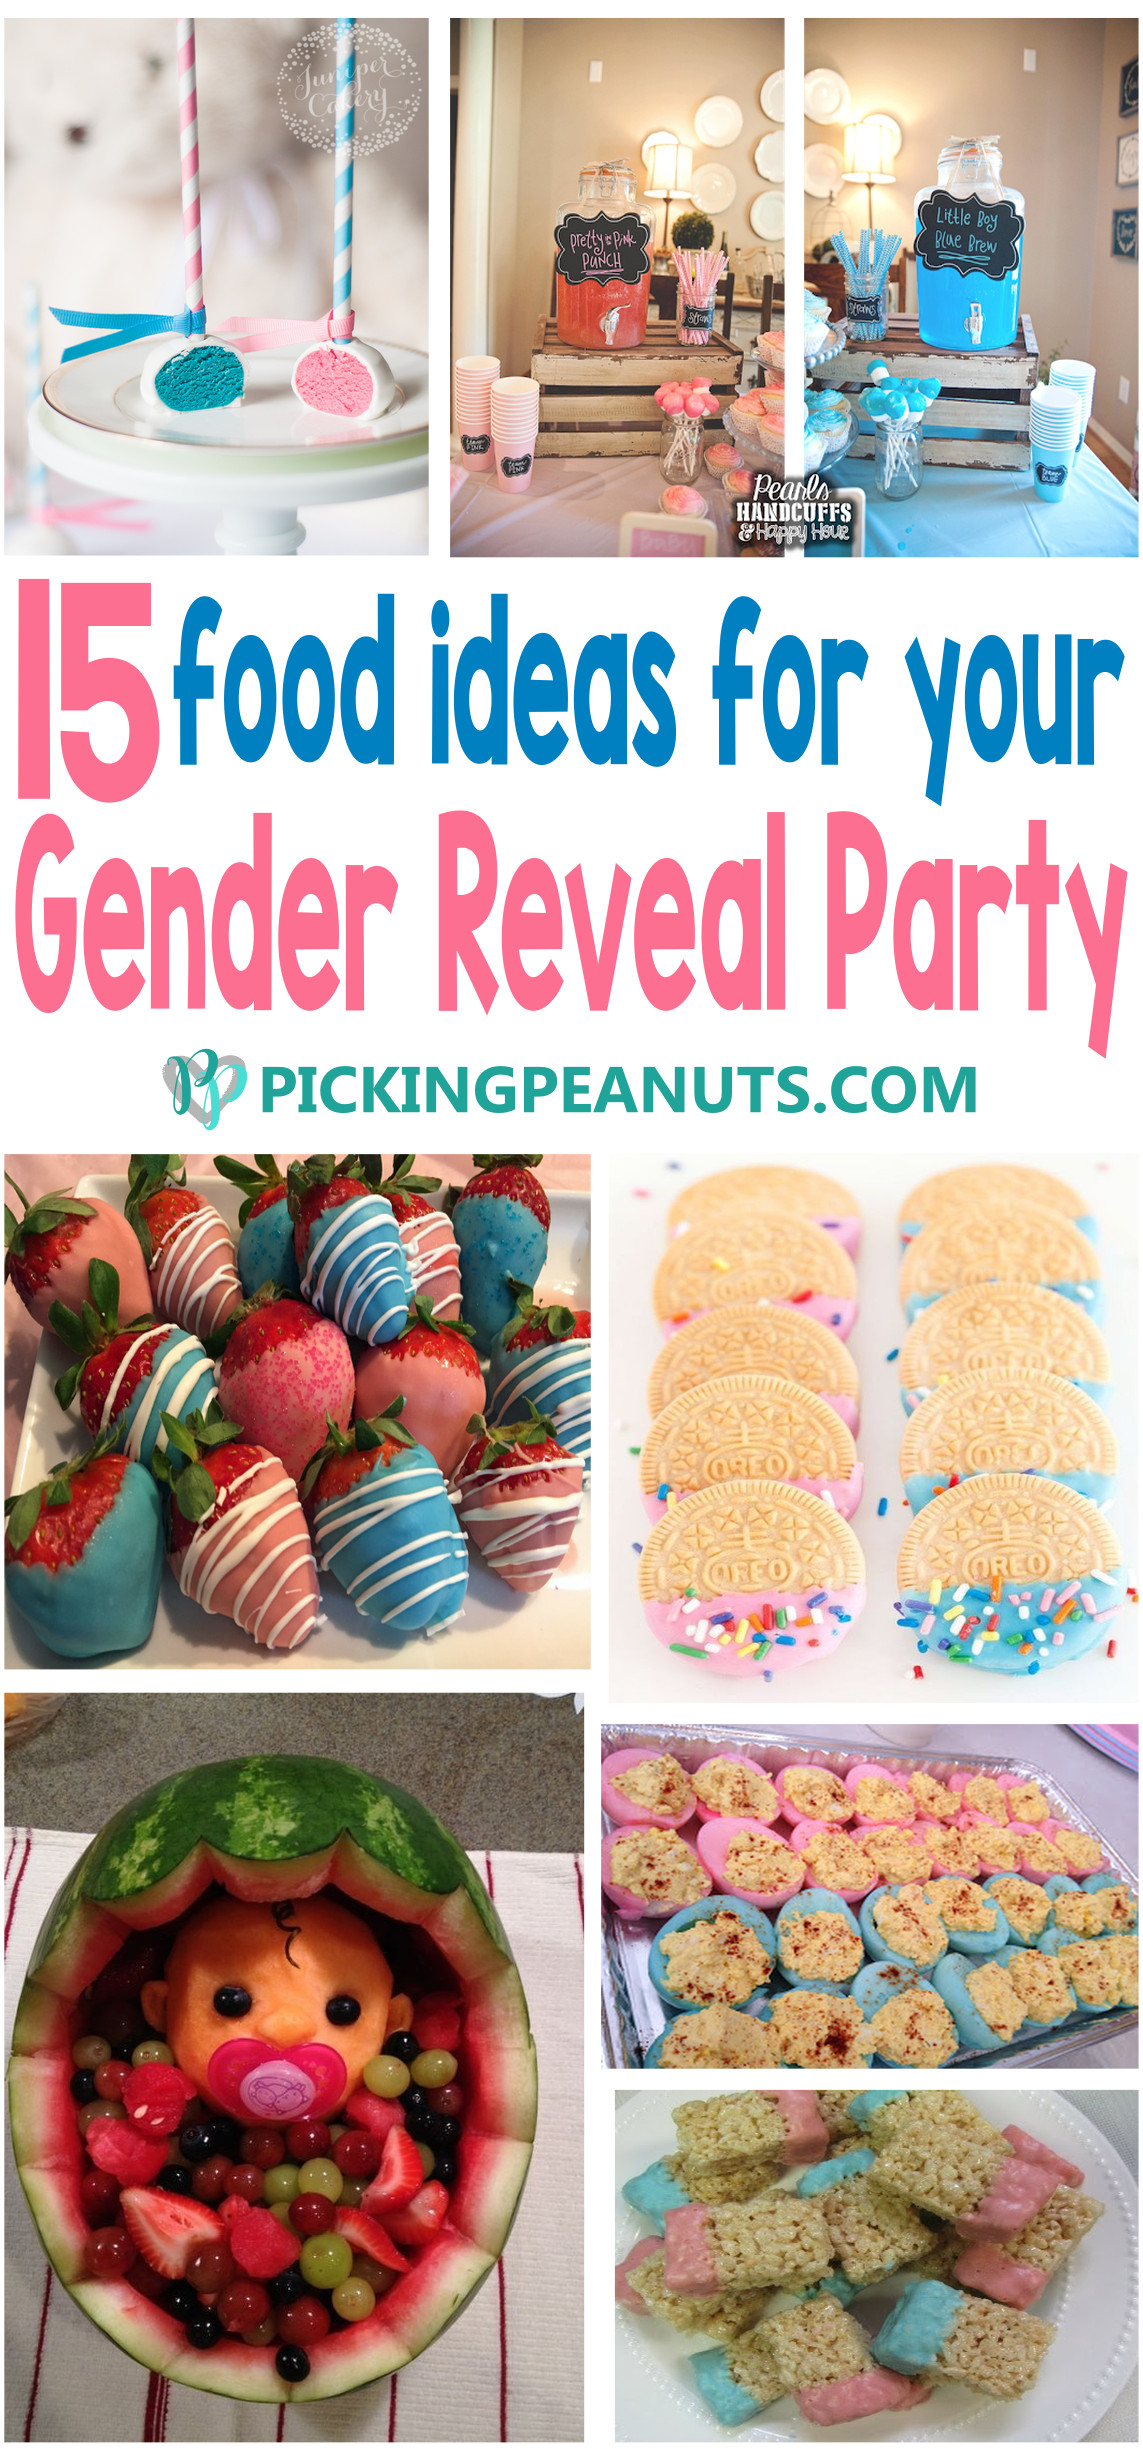 Good Ideas For Gender Reveal Party
 15 Gender Reveal Party Food Ideas Picking Peanuts